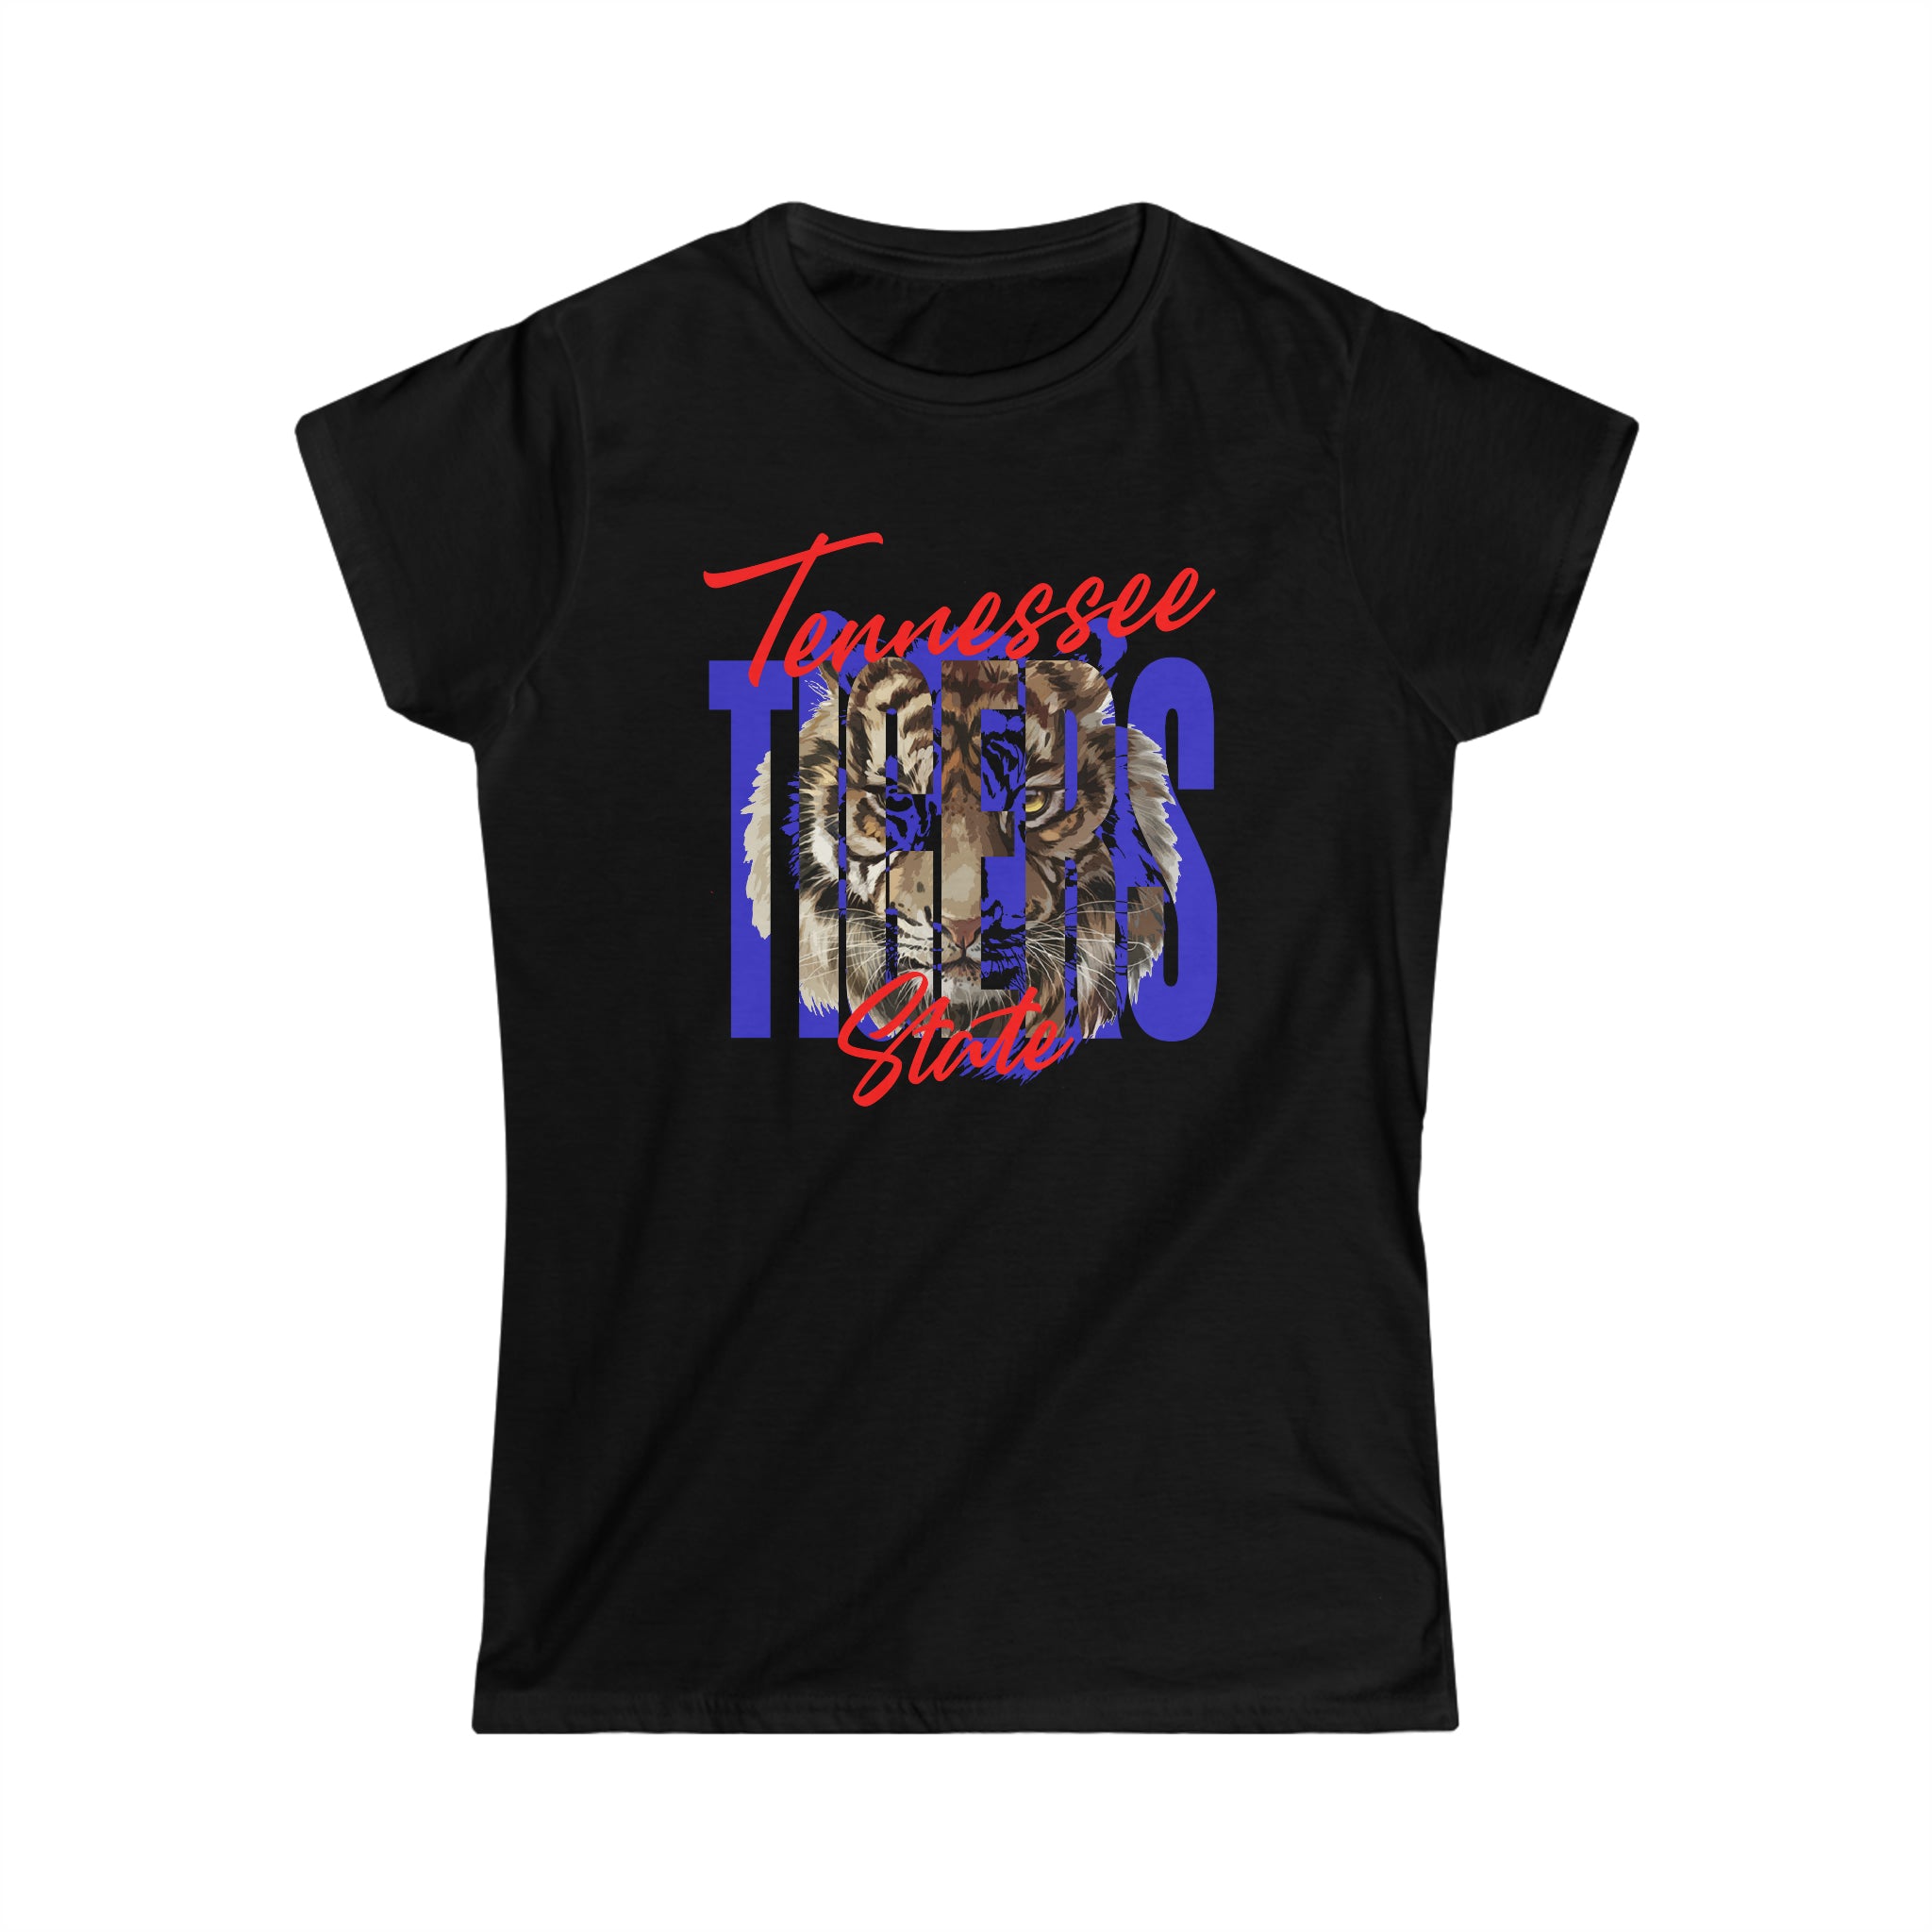 HBCUOnly - Tennessee State University Women's Softstyle Tee